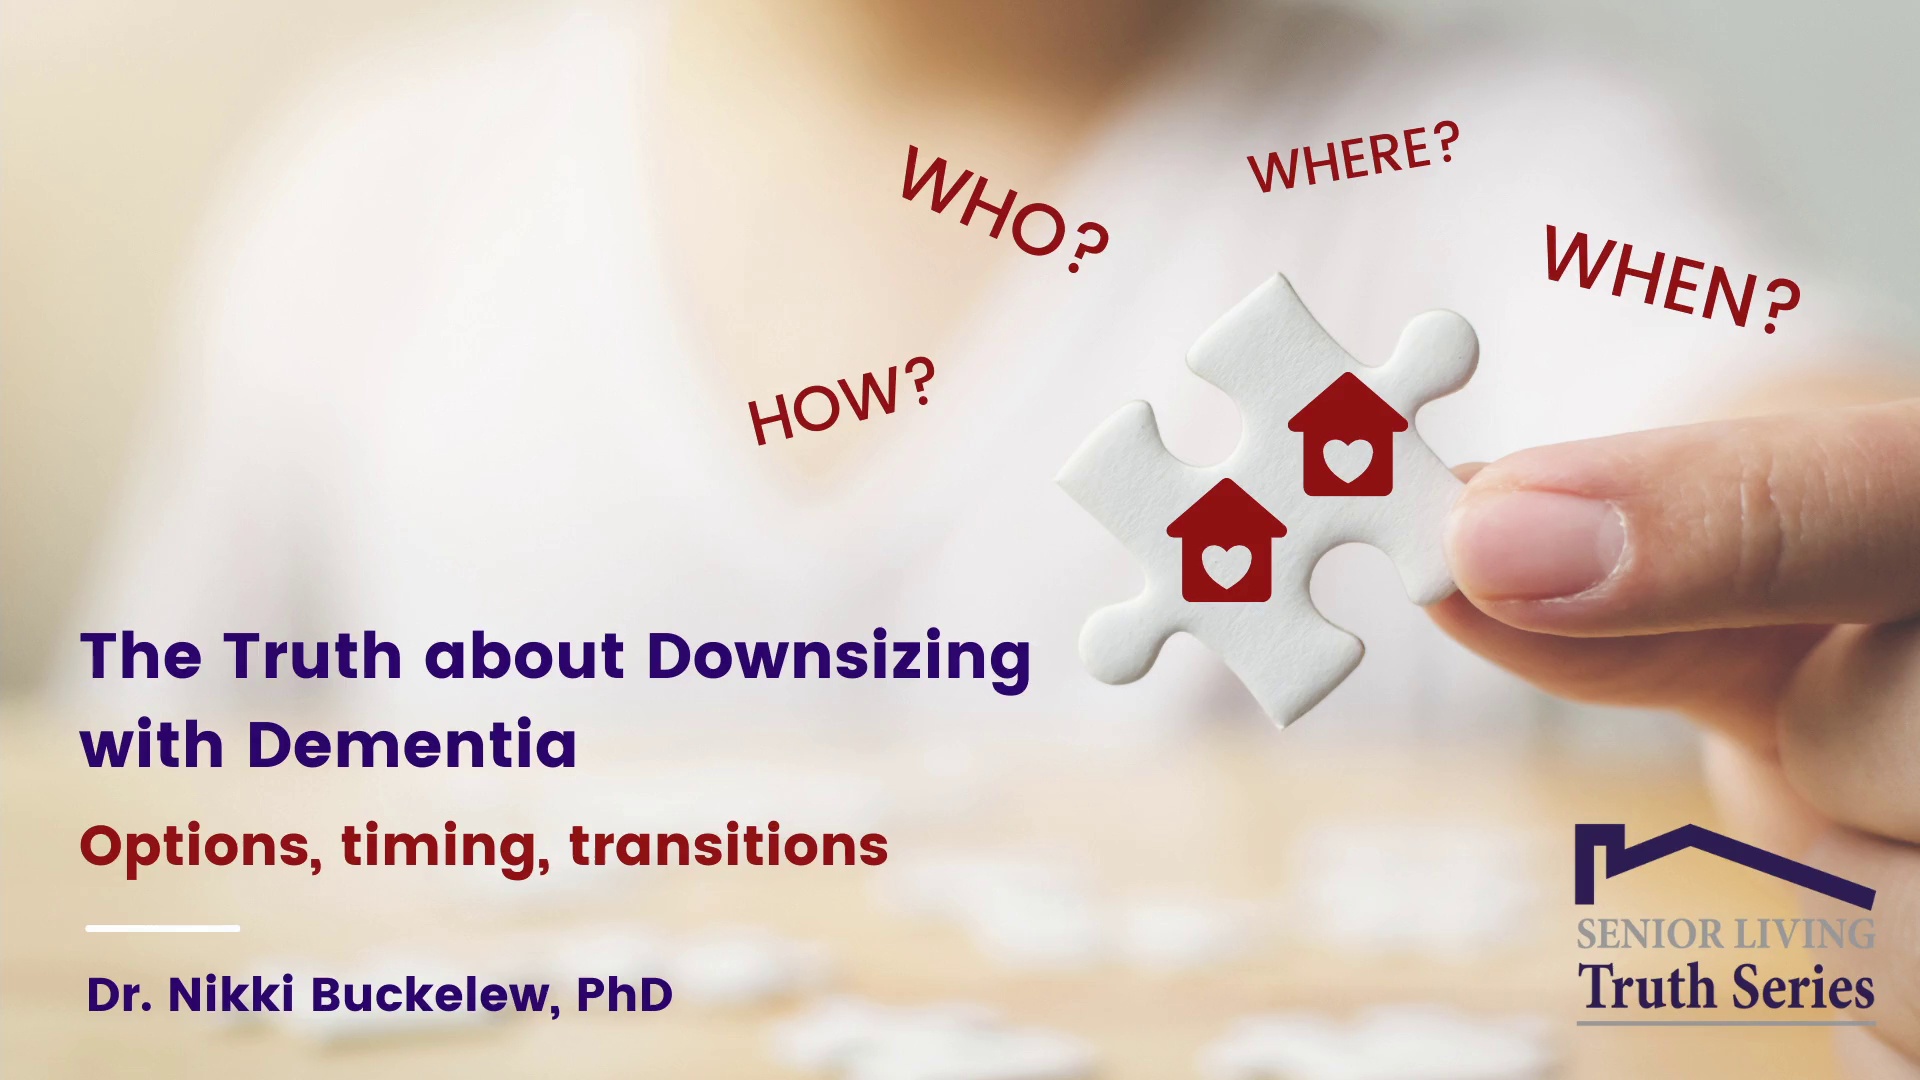 The Truth about Downsizing with Dementia: Options, timing, and transitions